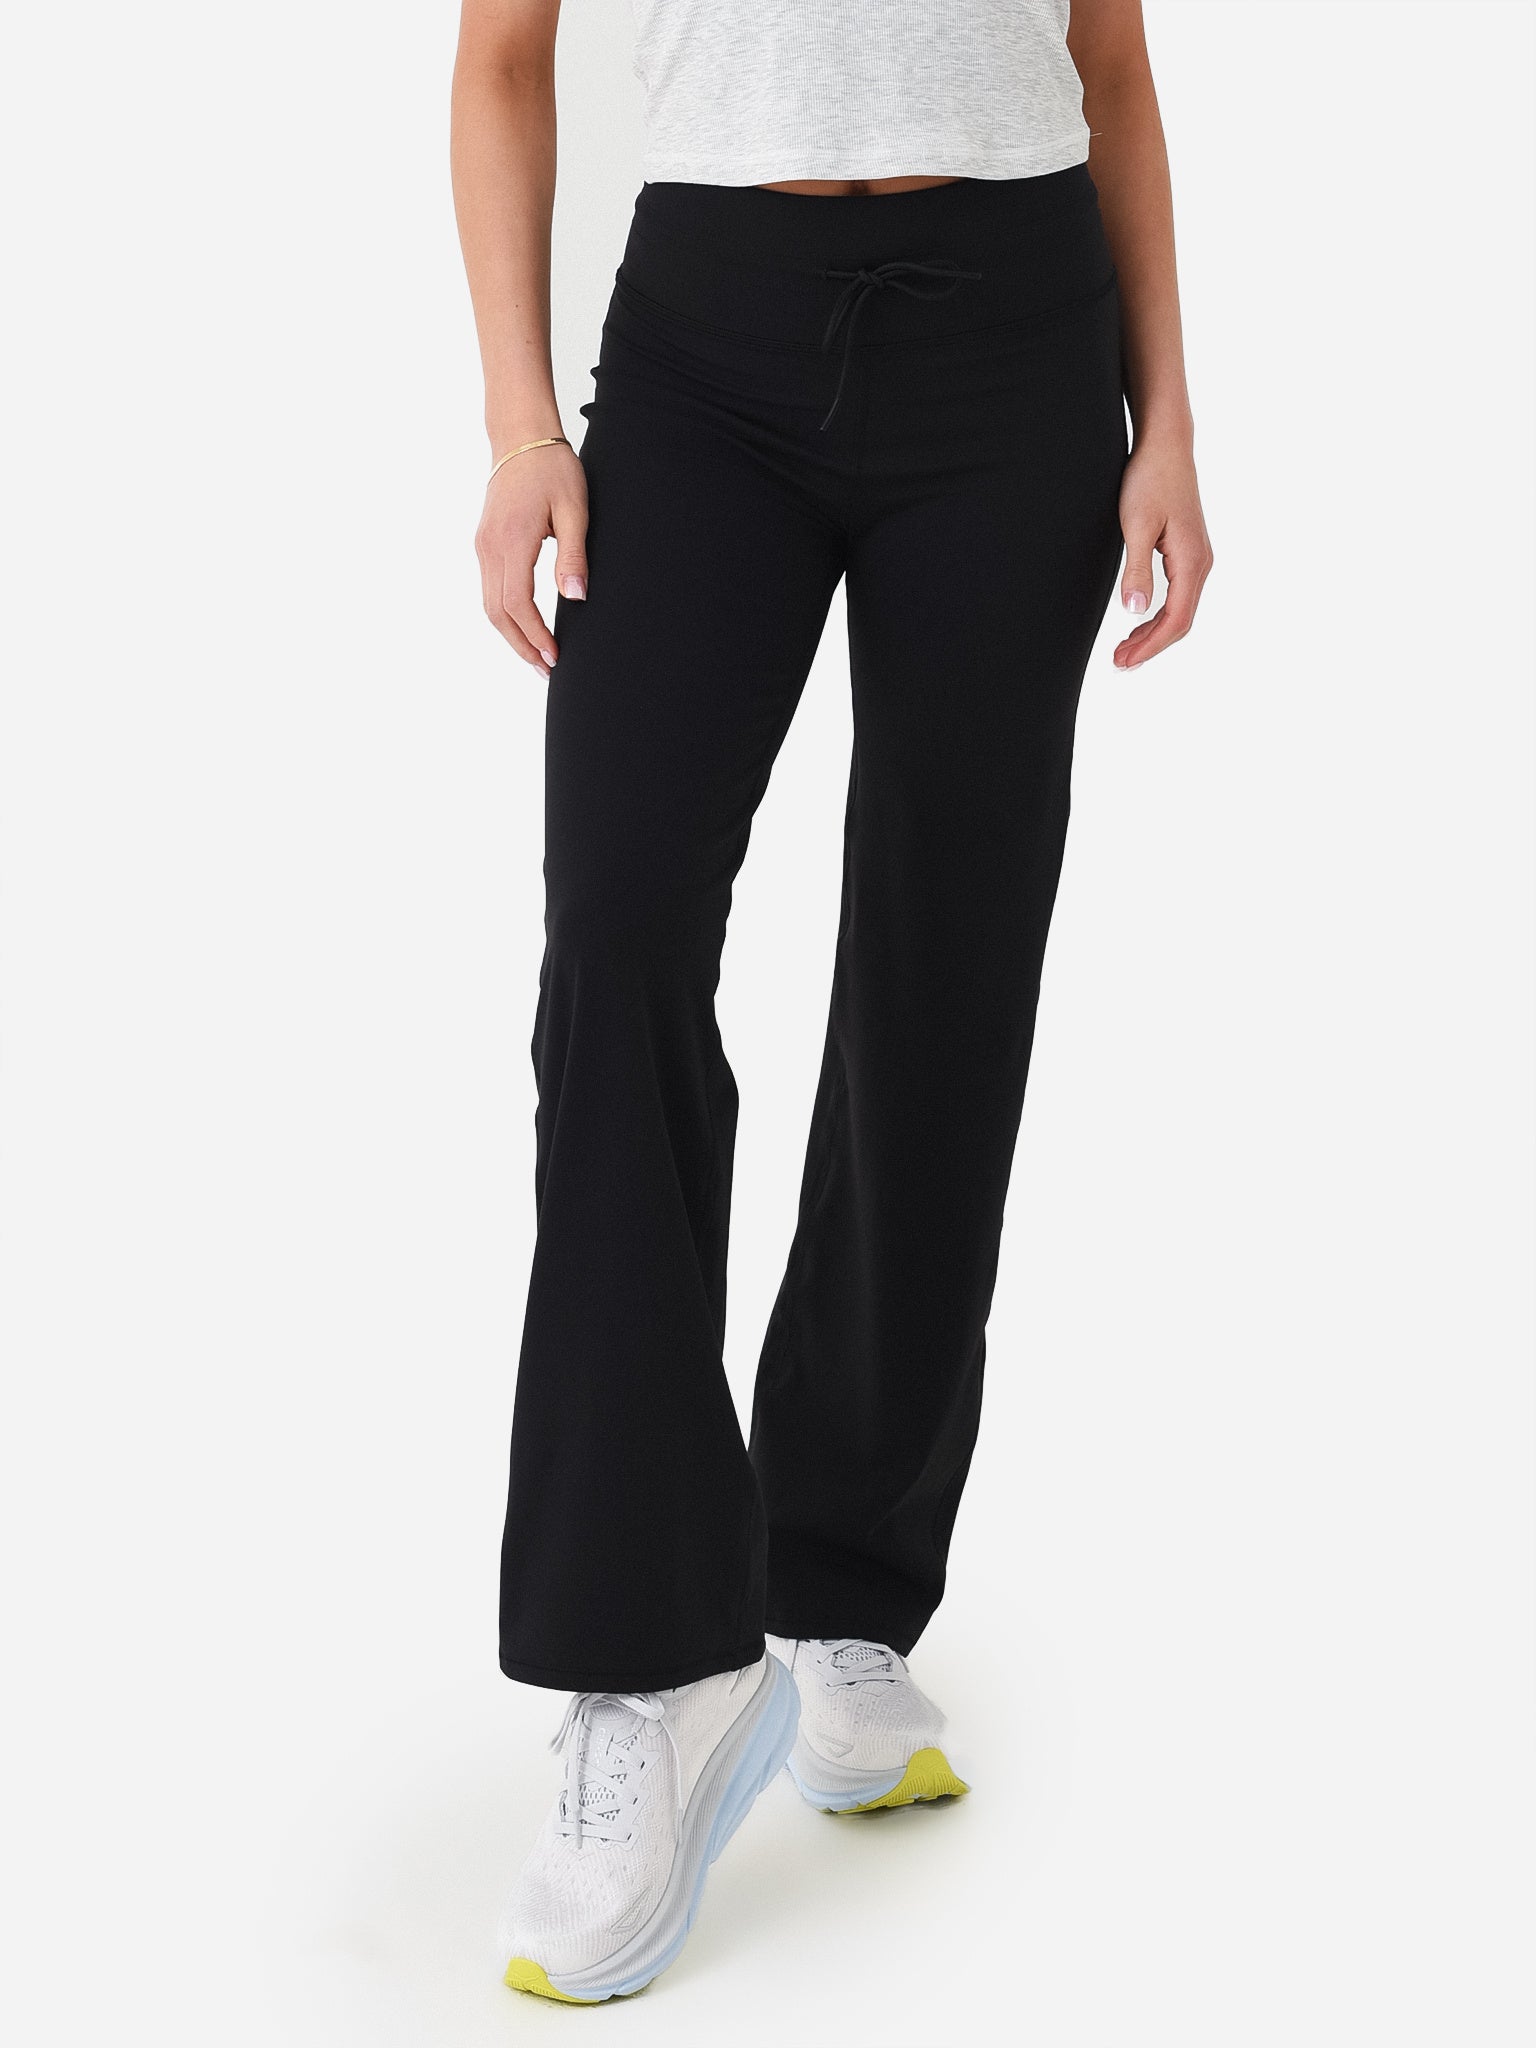 THE NORTH FACE Women Size Med Black Drawstring Bootcut Sweatpants